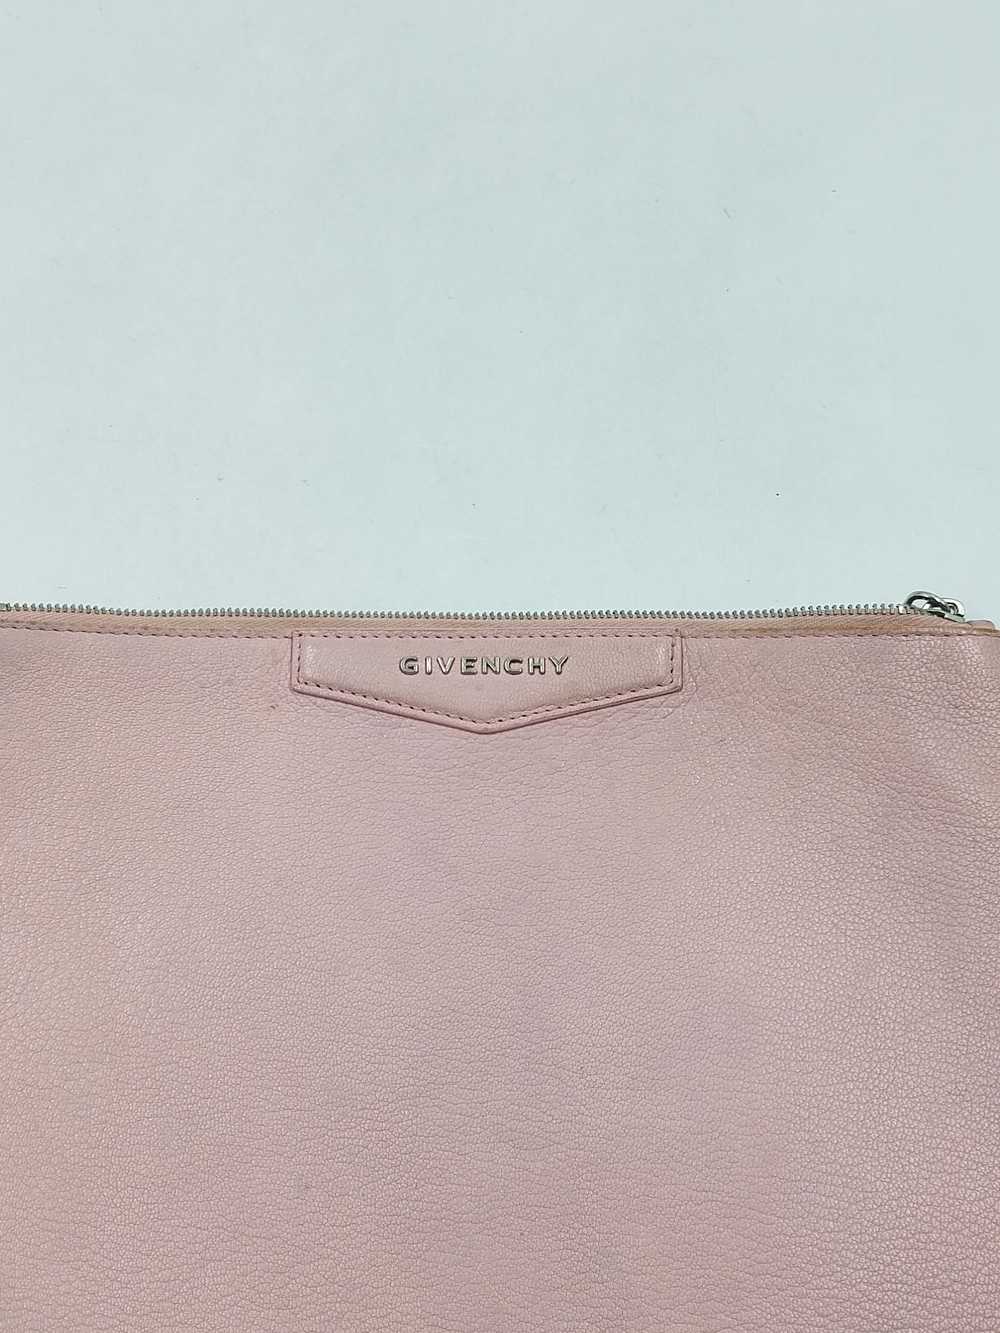 Authentic Givenchy Carnation Pink Clutch - image 6